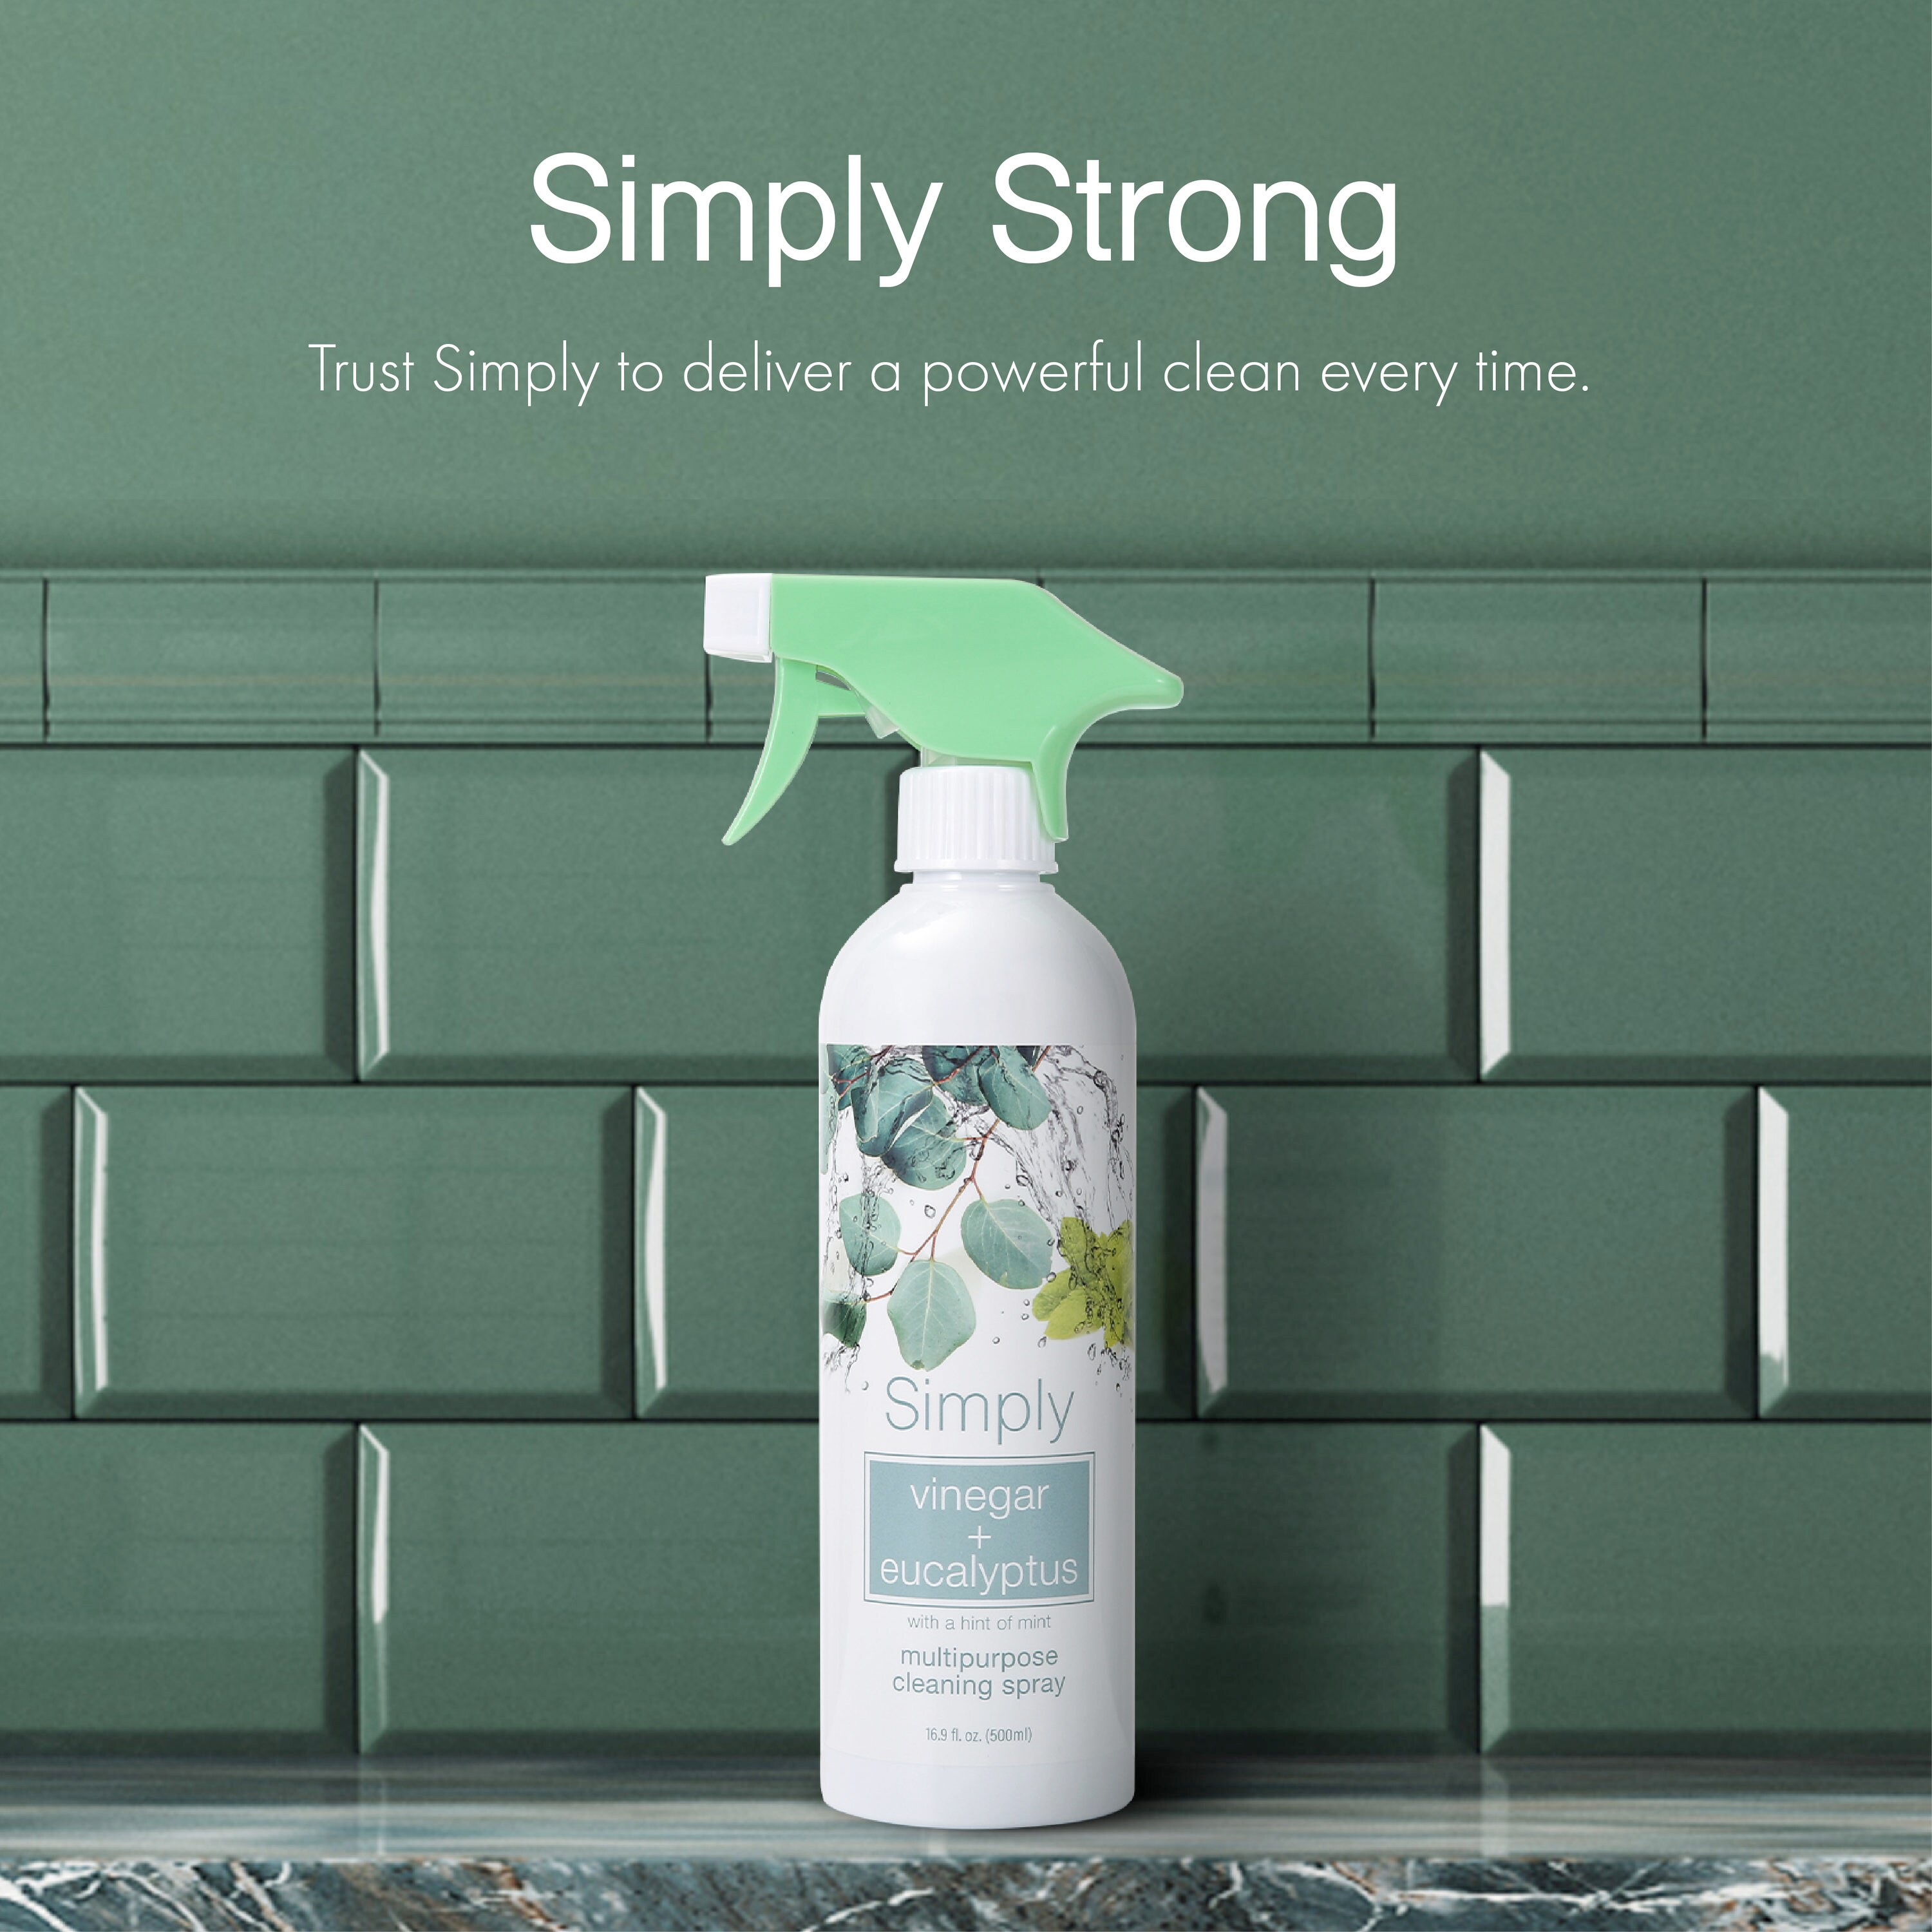 Simply Done Cleaning Vinegar, Special Cleaning Strength